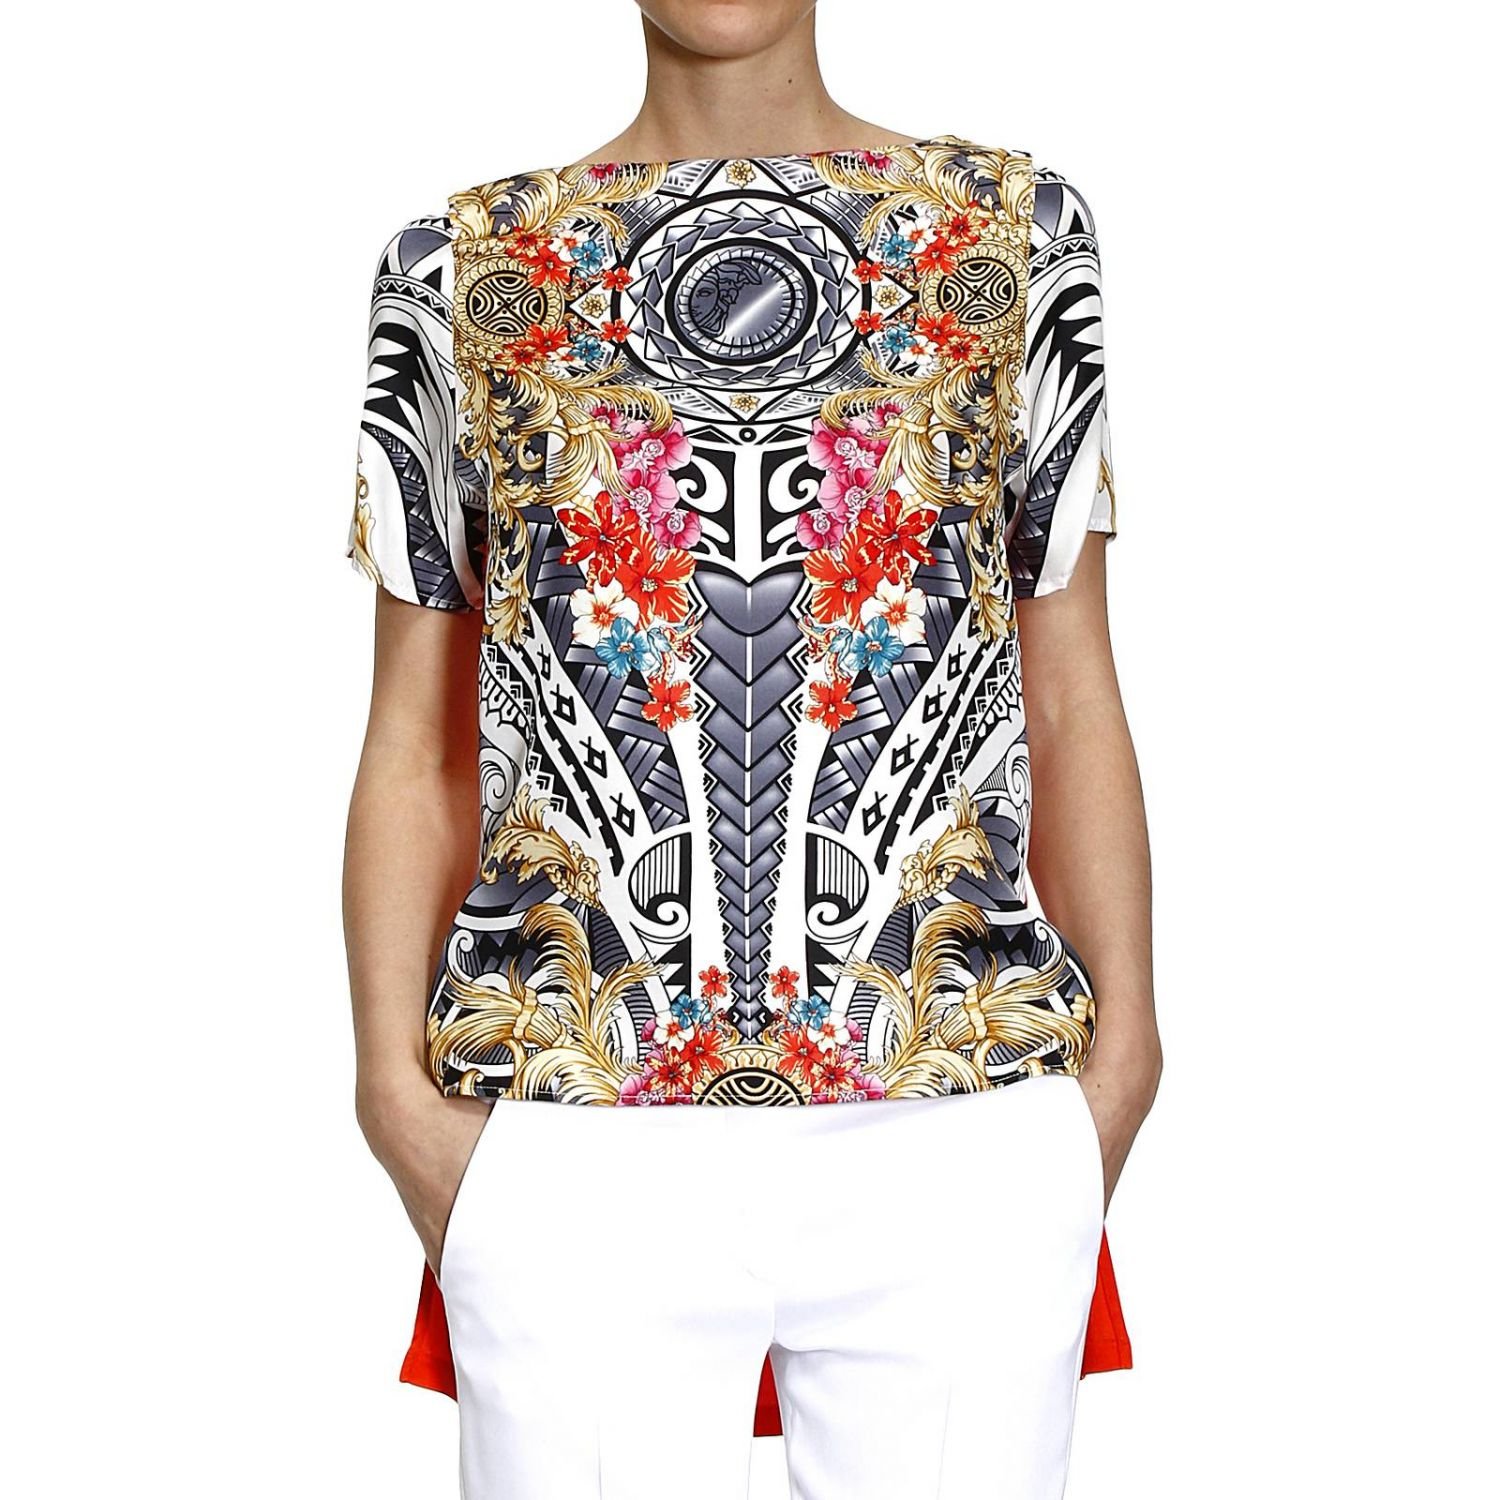 Versace collection. Versace collection g33515. Версаче блузки ЦУМ. Блузка от Версаче.